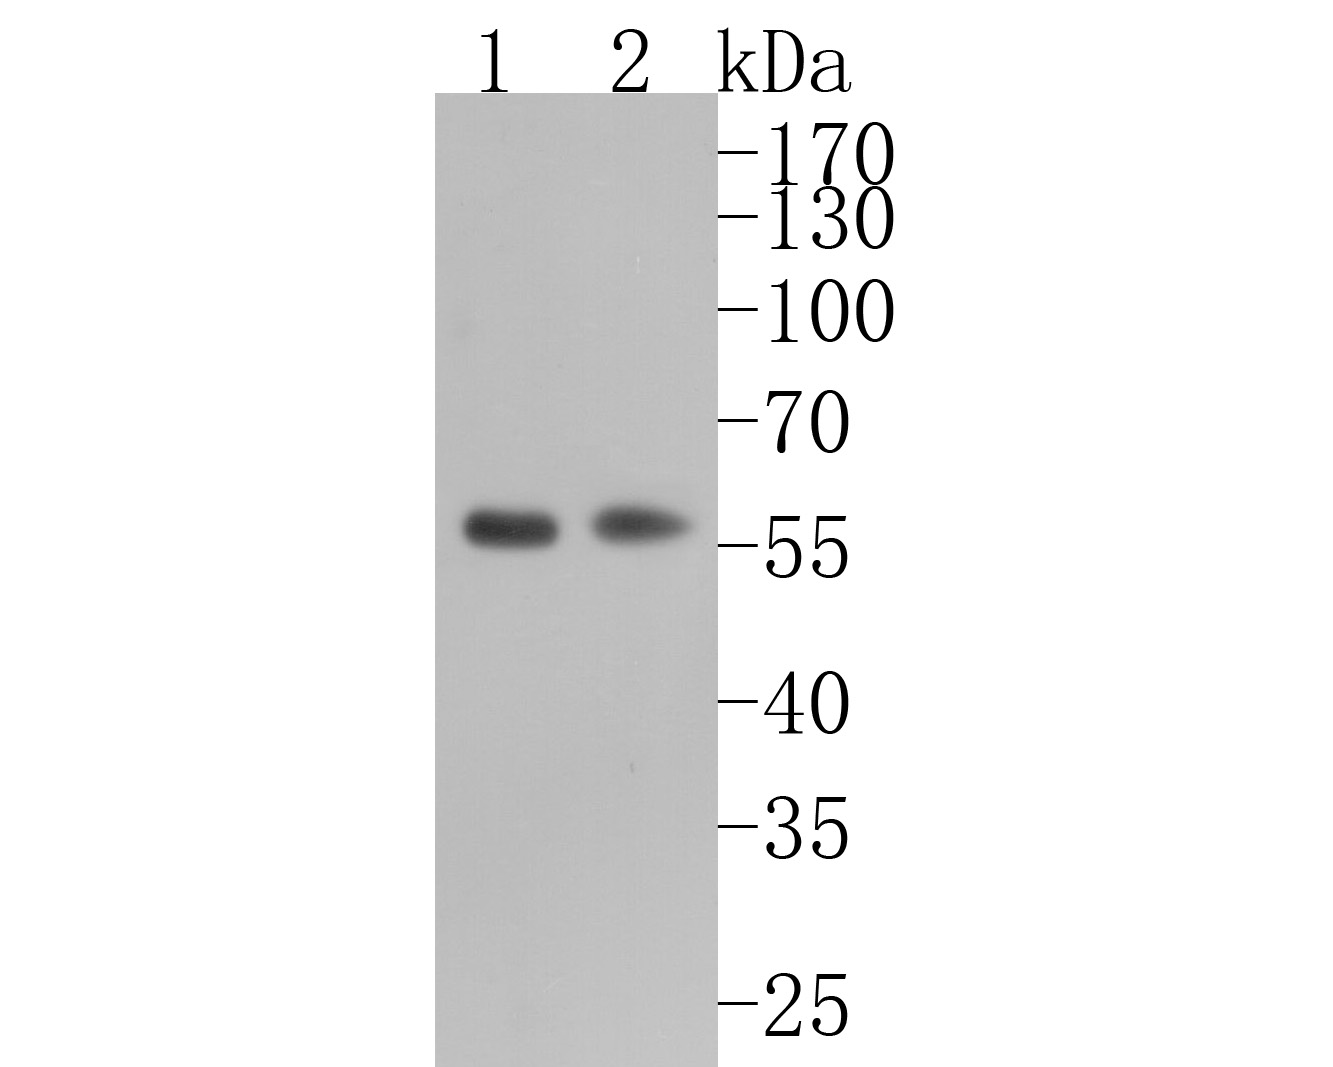 Western blot analysis of Retinoid X Receptor alpha on different lysates. Proteins were transferred to a PVDF membrane and blocked with 5% BSA in PBS for 1 hour at room temperature. The primary antibody (ET7108-99, 1/500) was used in 5% BSA at room temperature for 2 hours. Goat Anti-Rabbit IgG - HRP Secondary Antibody (HA1001) at 1:5,000 dilution was used for 1 hour at room temperature.<br />
Positive control: <br />
Lane 1: A549 cell lysate<br />
Lane 2: MCF-7 cell lysate